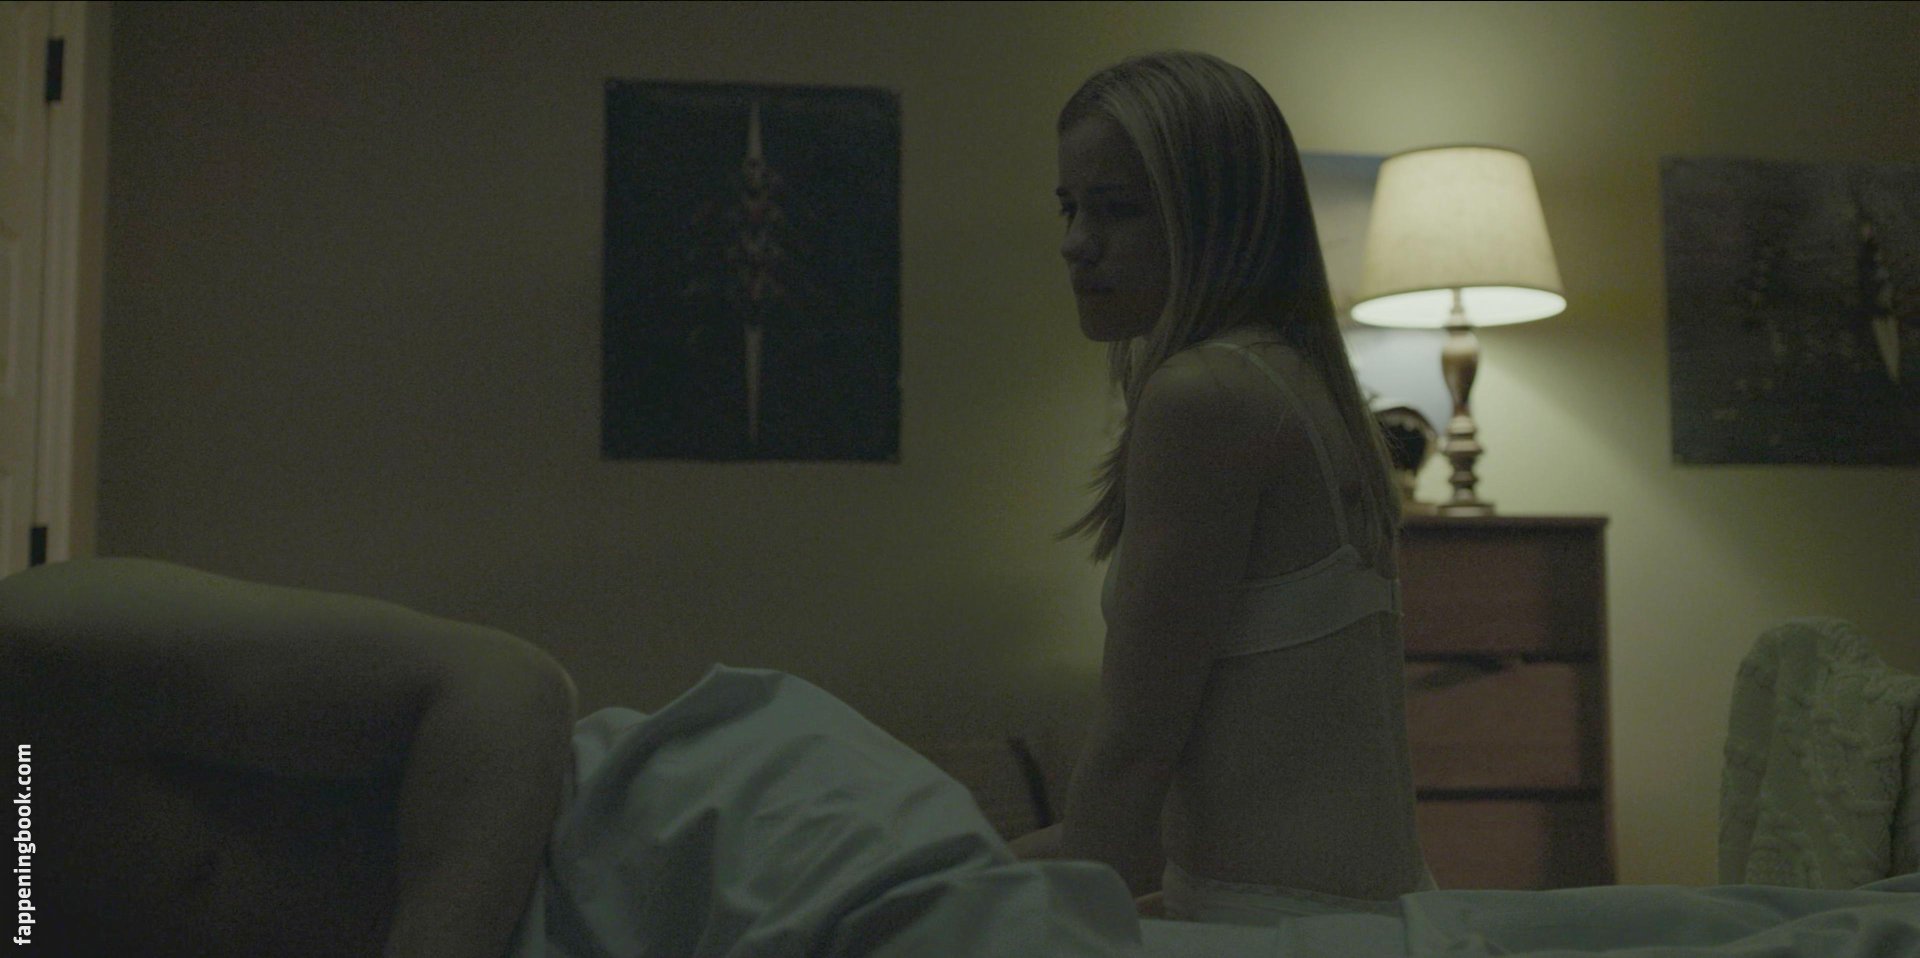 Willa Fitzgerald Nude, The Fappening - Photo #545162 - FappeningBook.